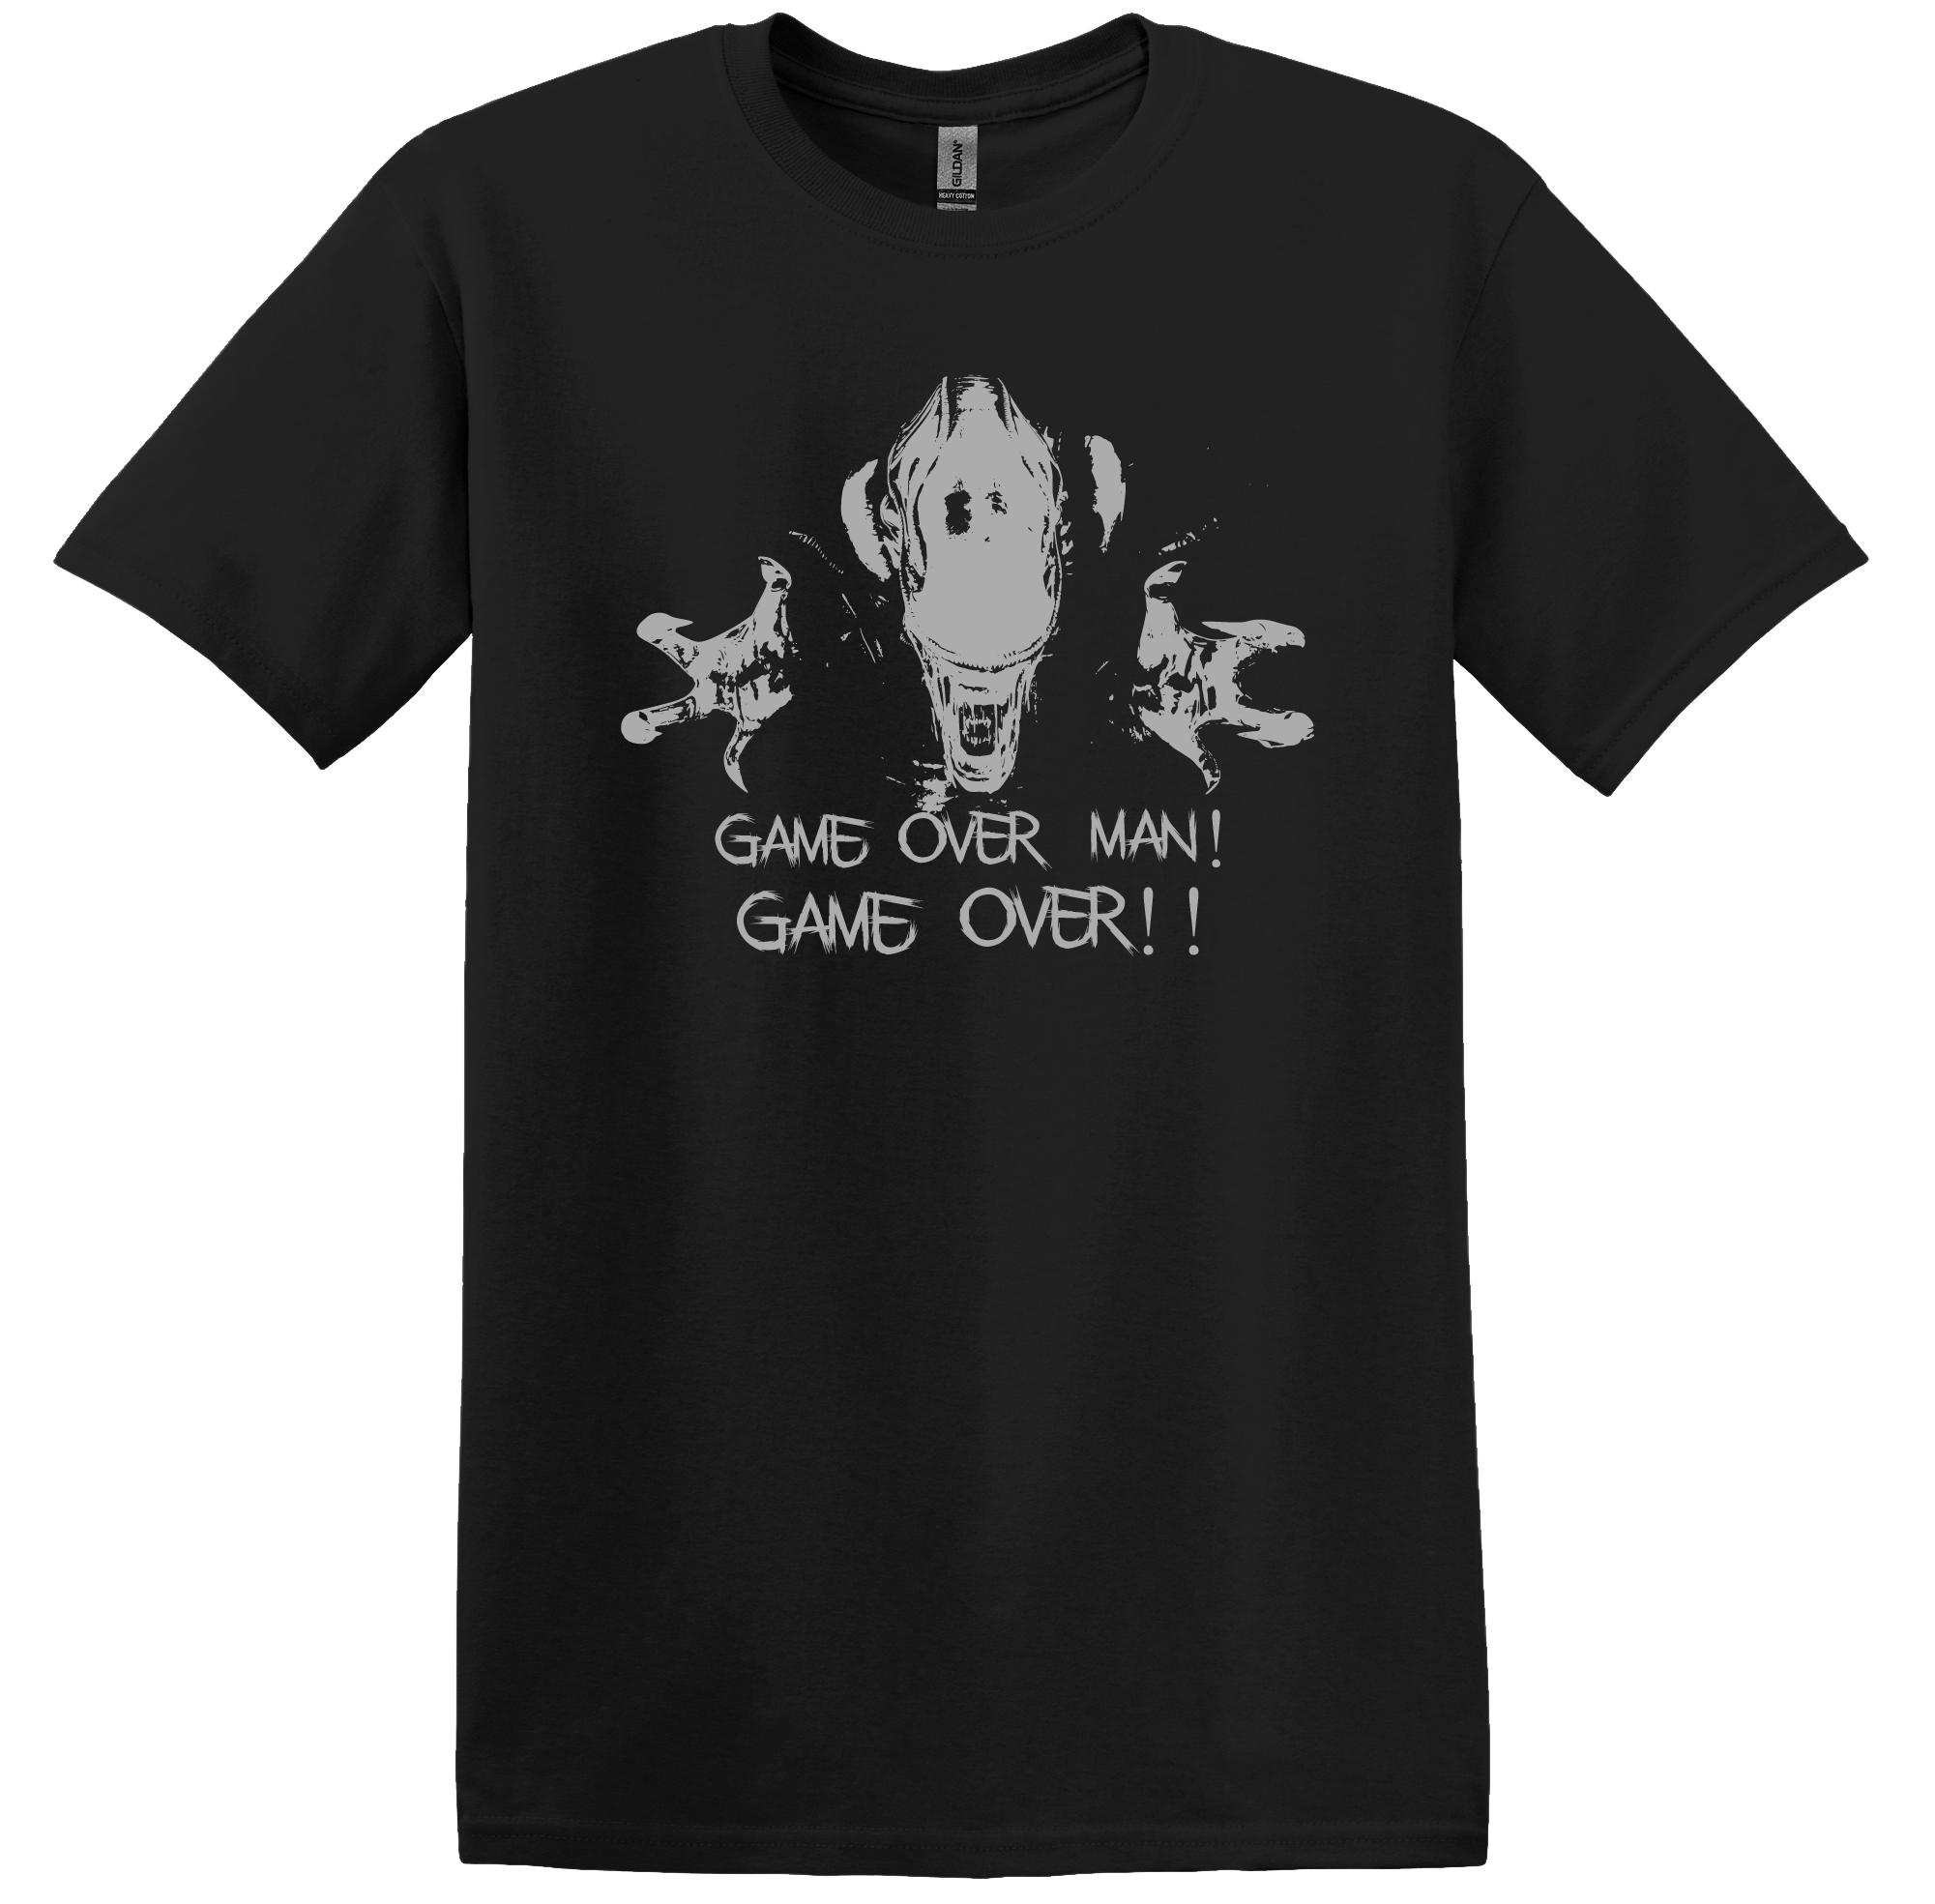 GAME OVER MAN! GAME OVER!!" Aliens-T-Shirt DawnZ Customs